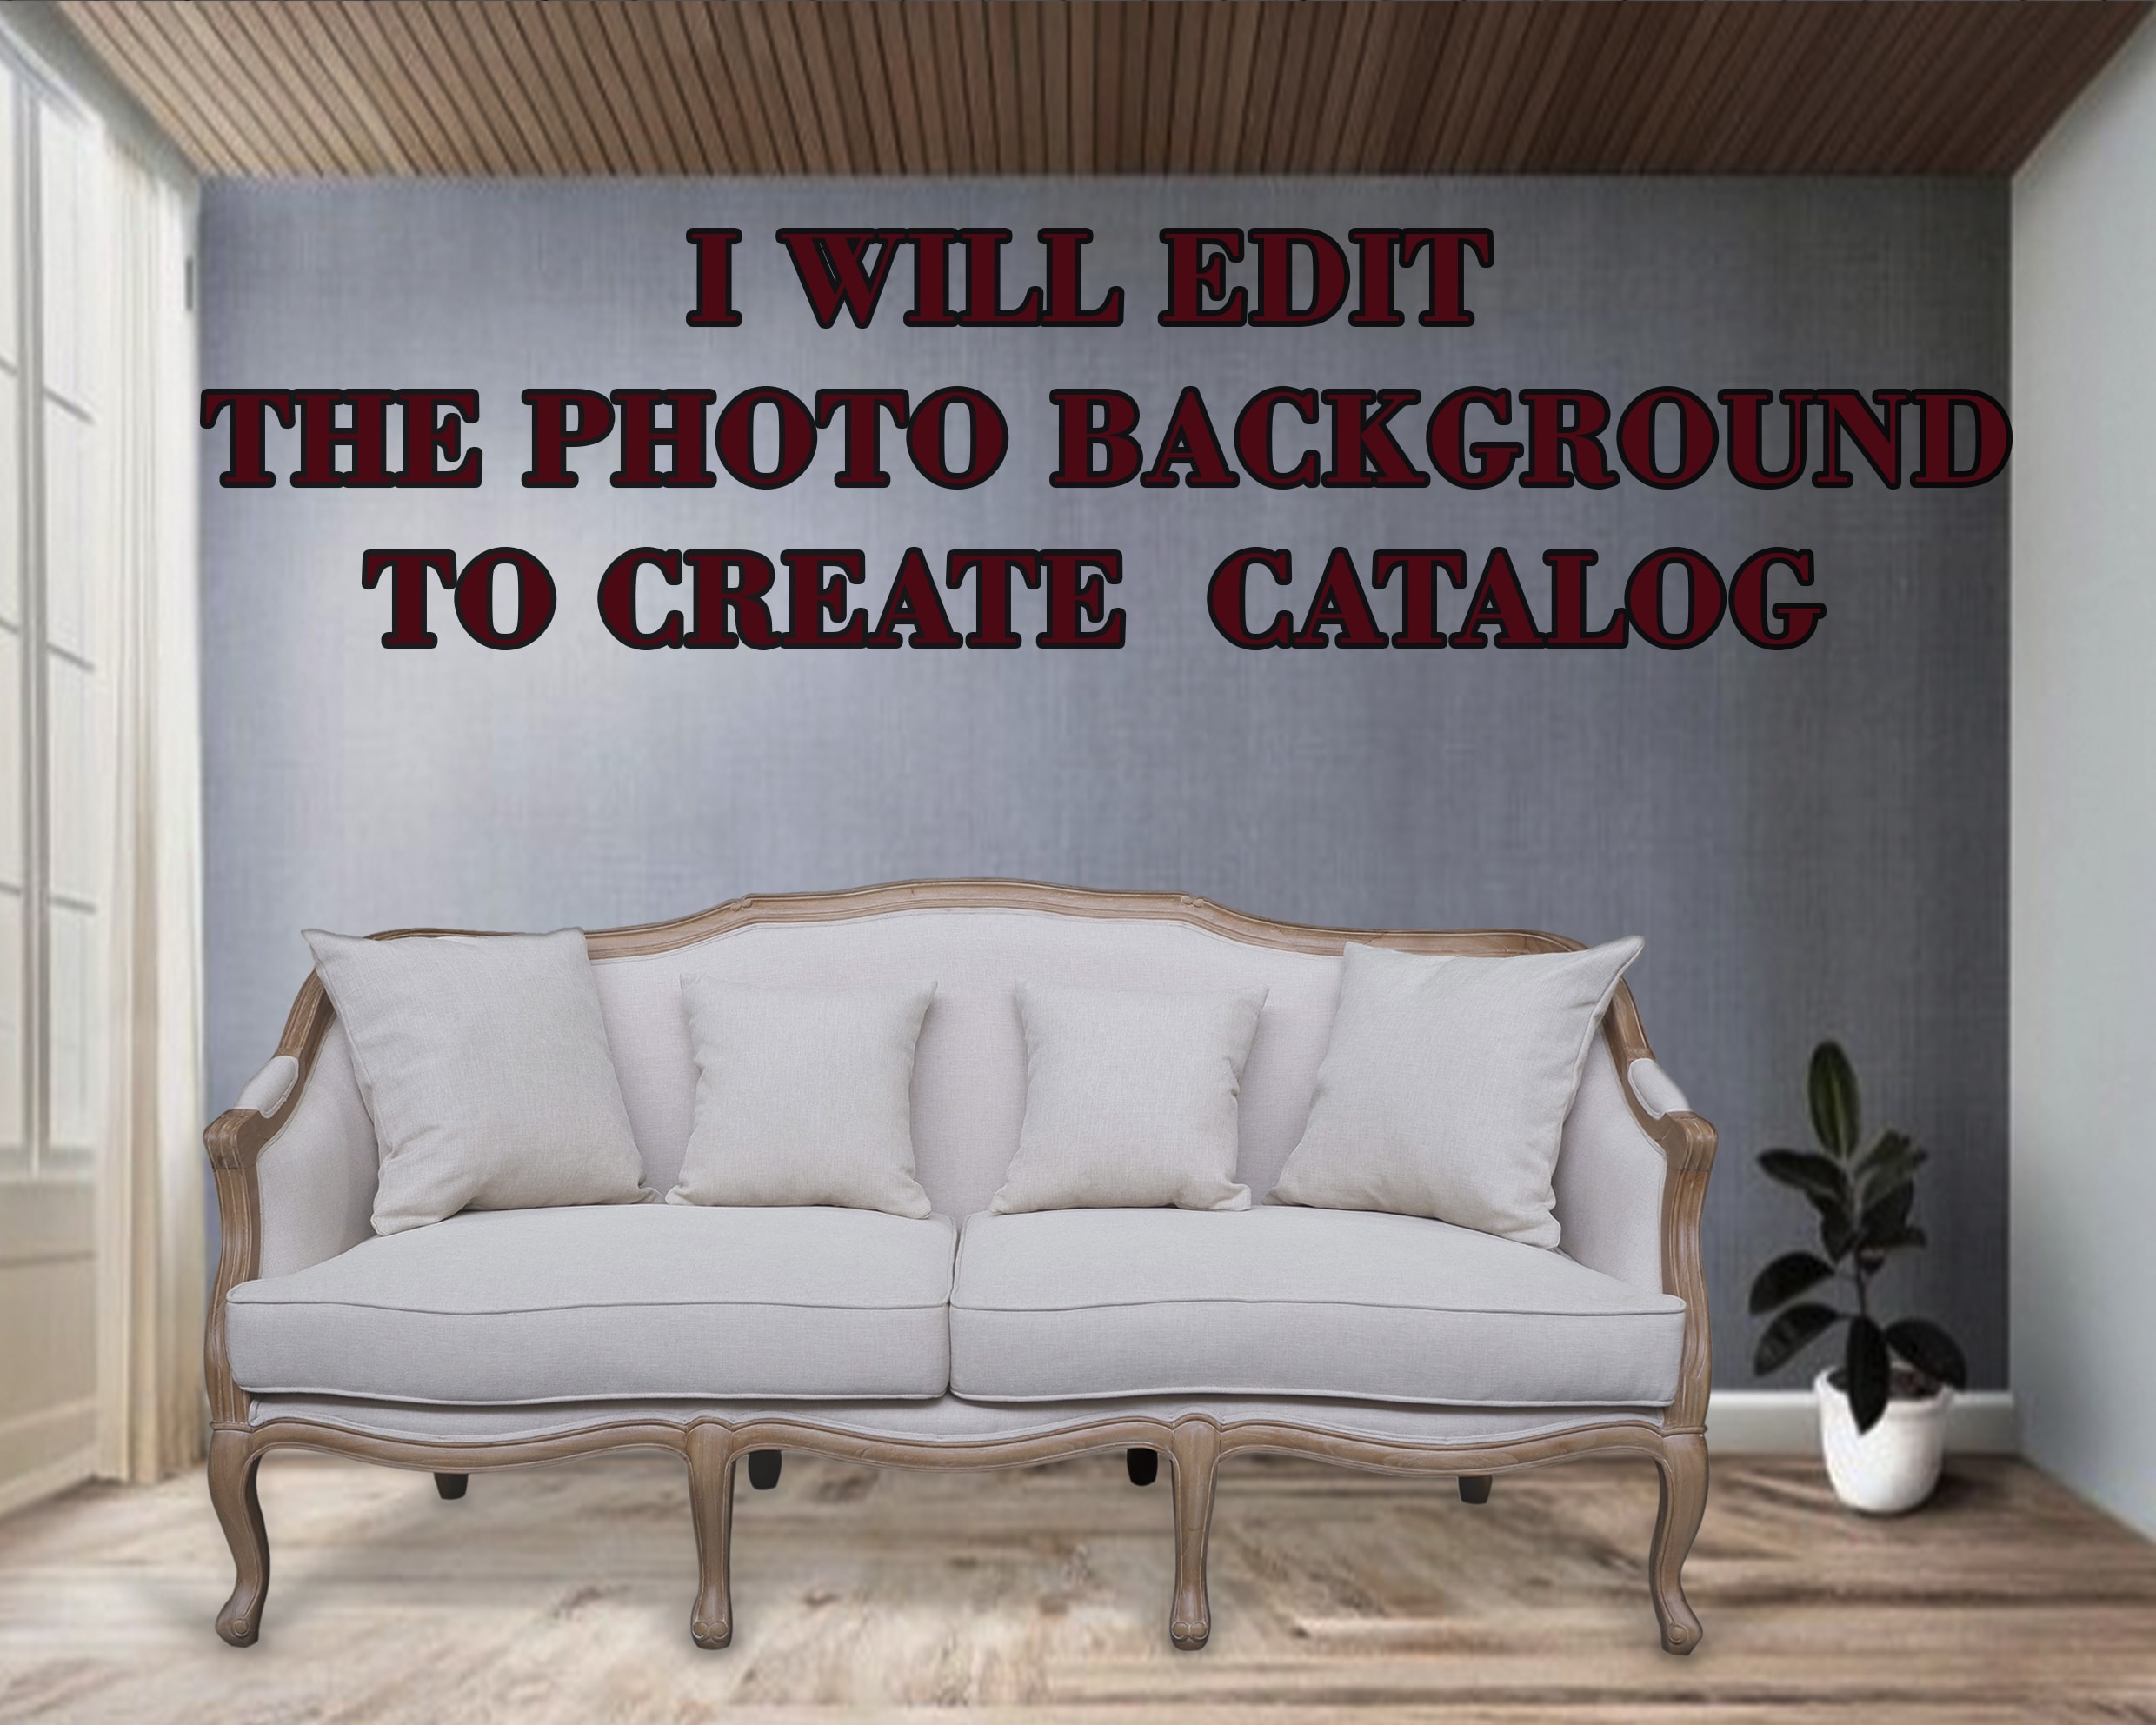 Furniture photo editing to create a catalog by Masphink | Fiverr